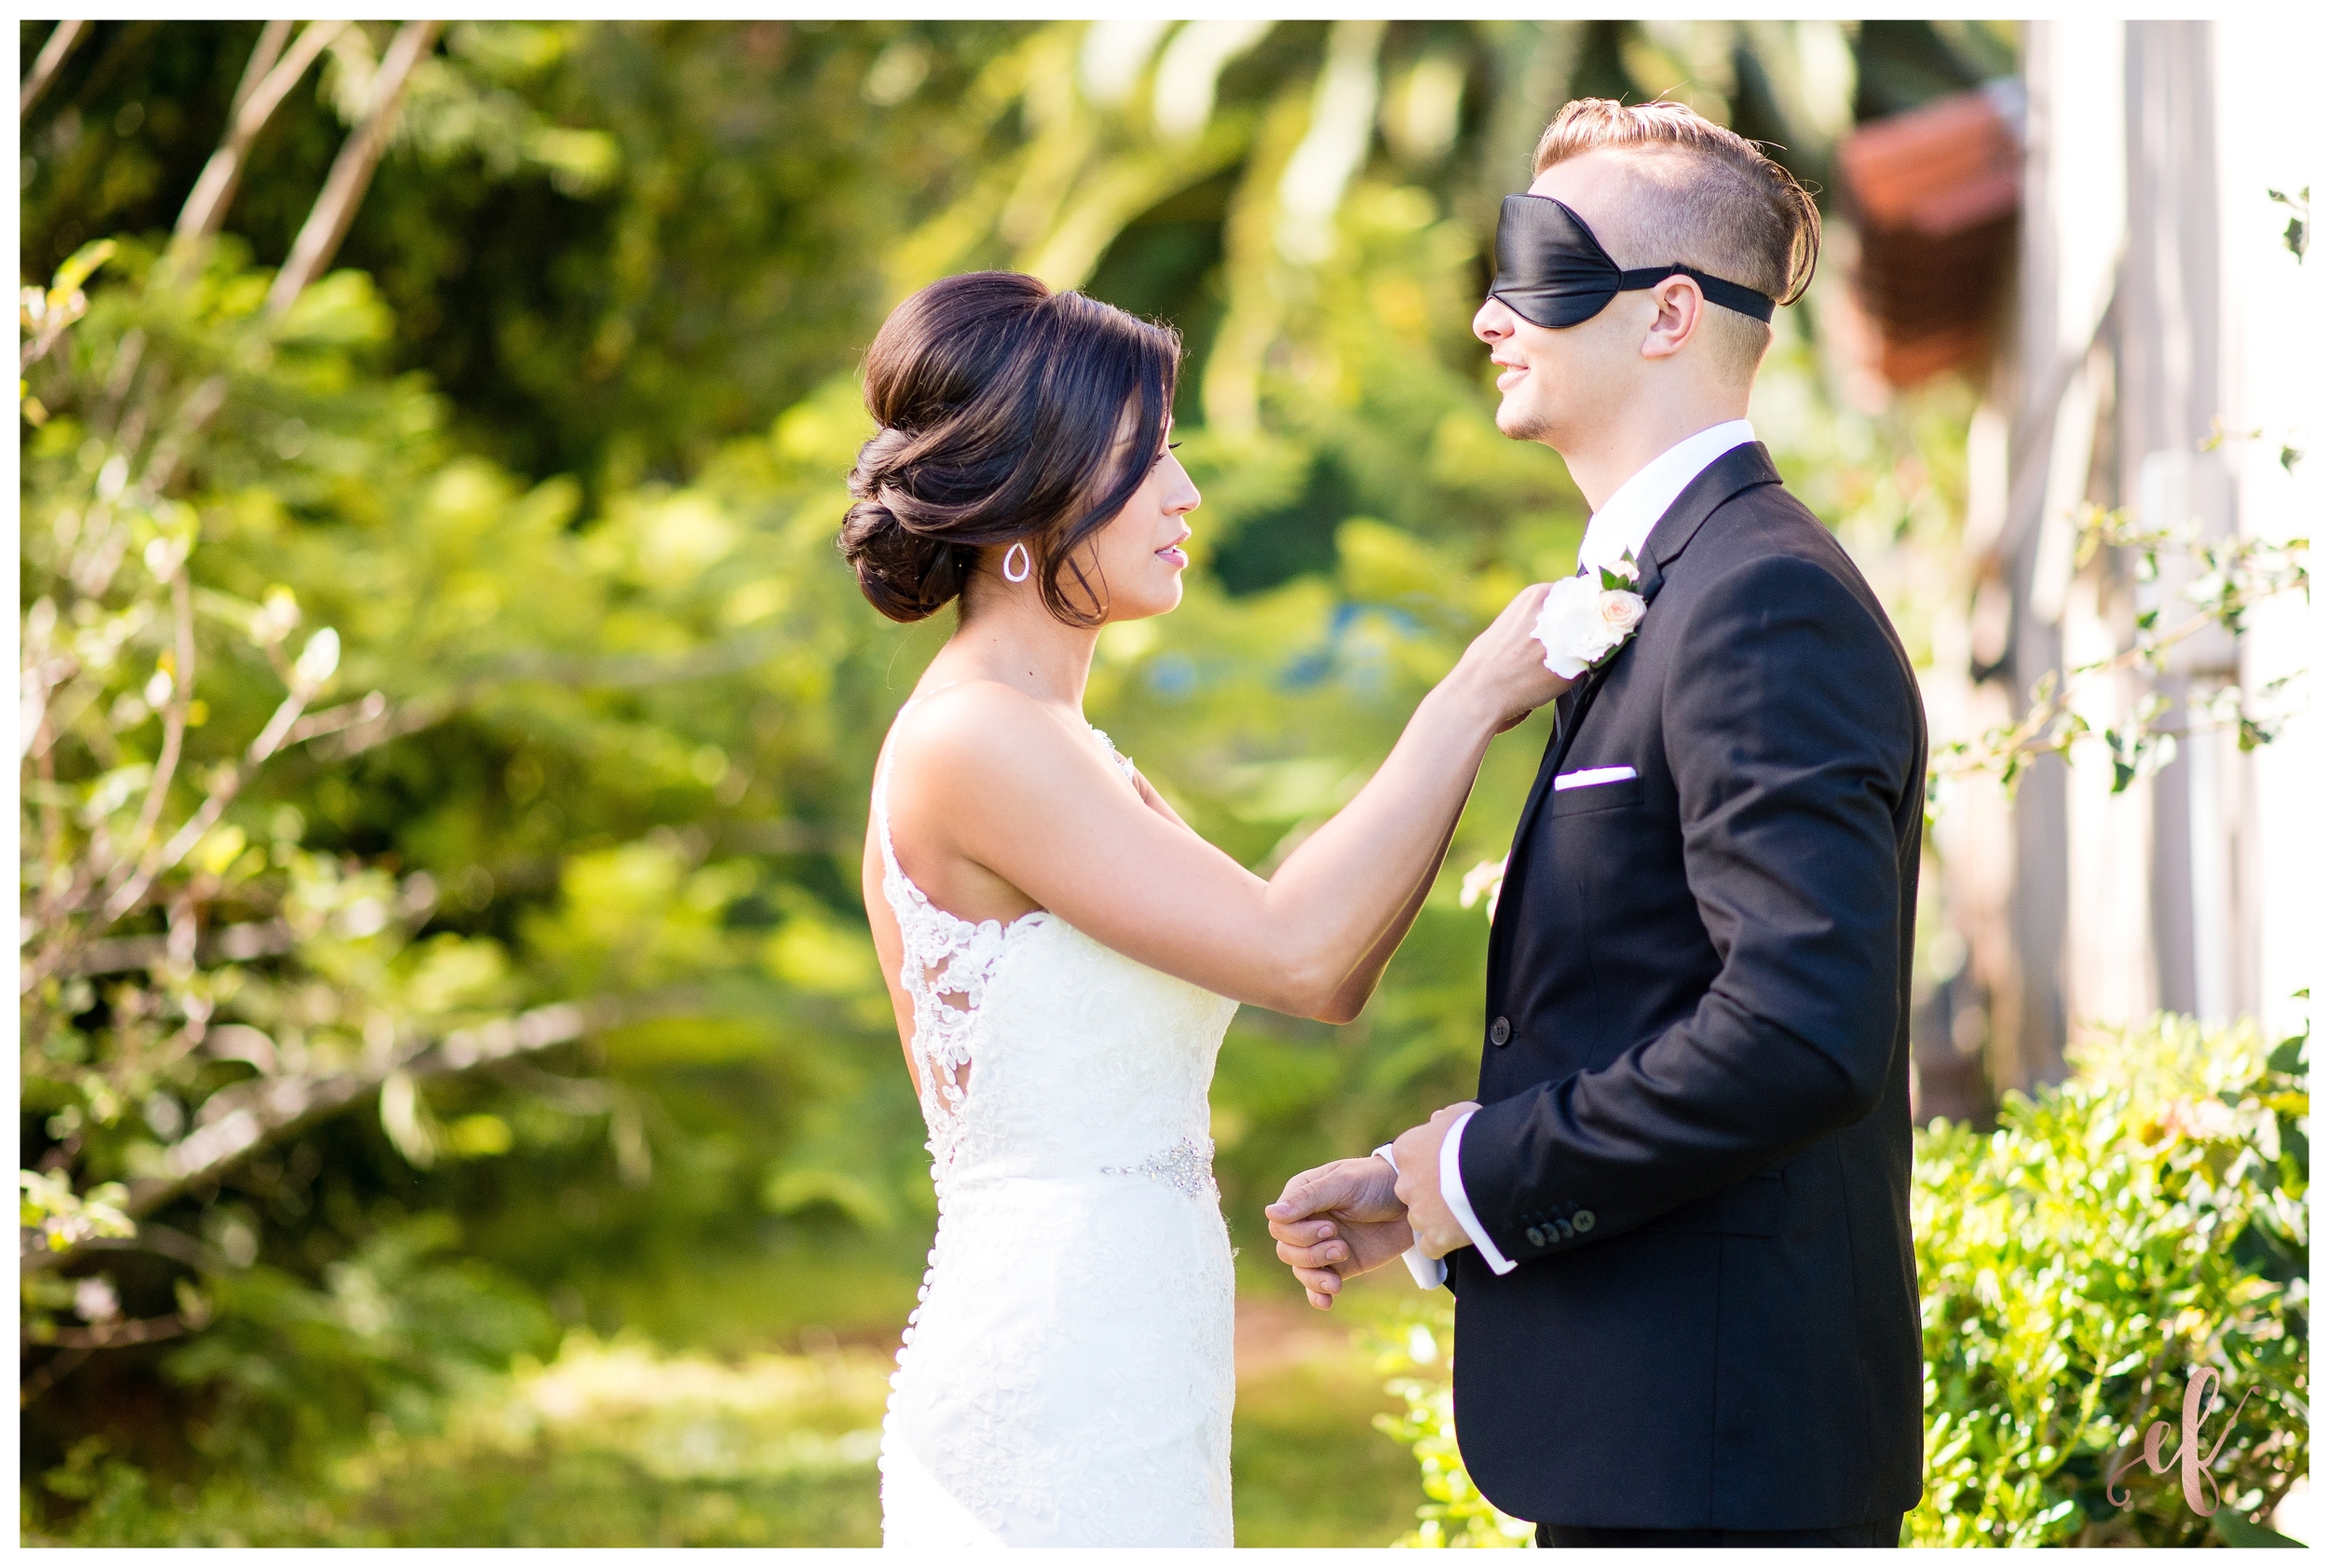 San Diego Wedding Photography | Bride | Groom | Portraits | Blindfold | First Look